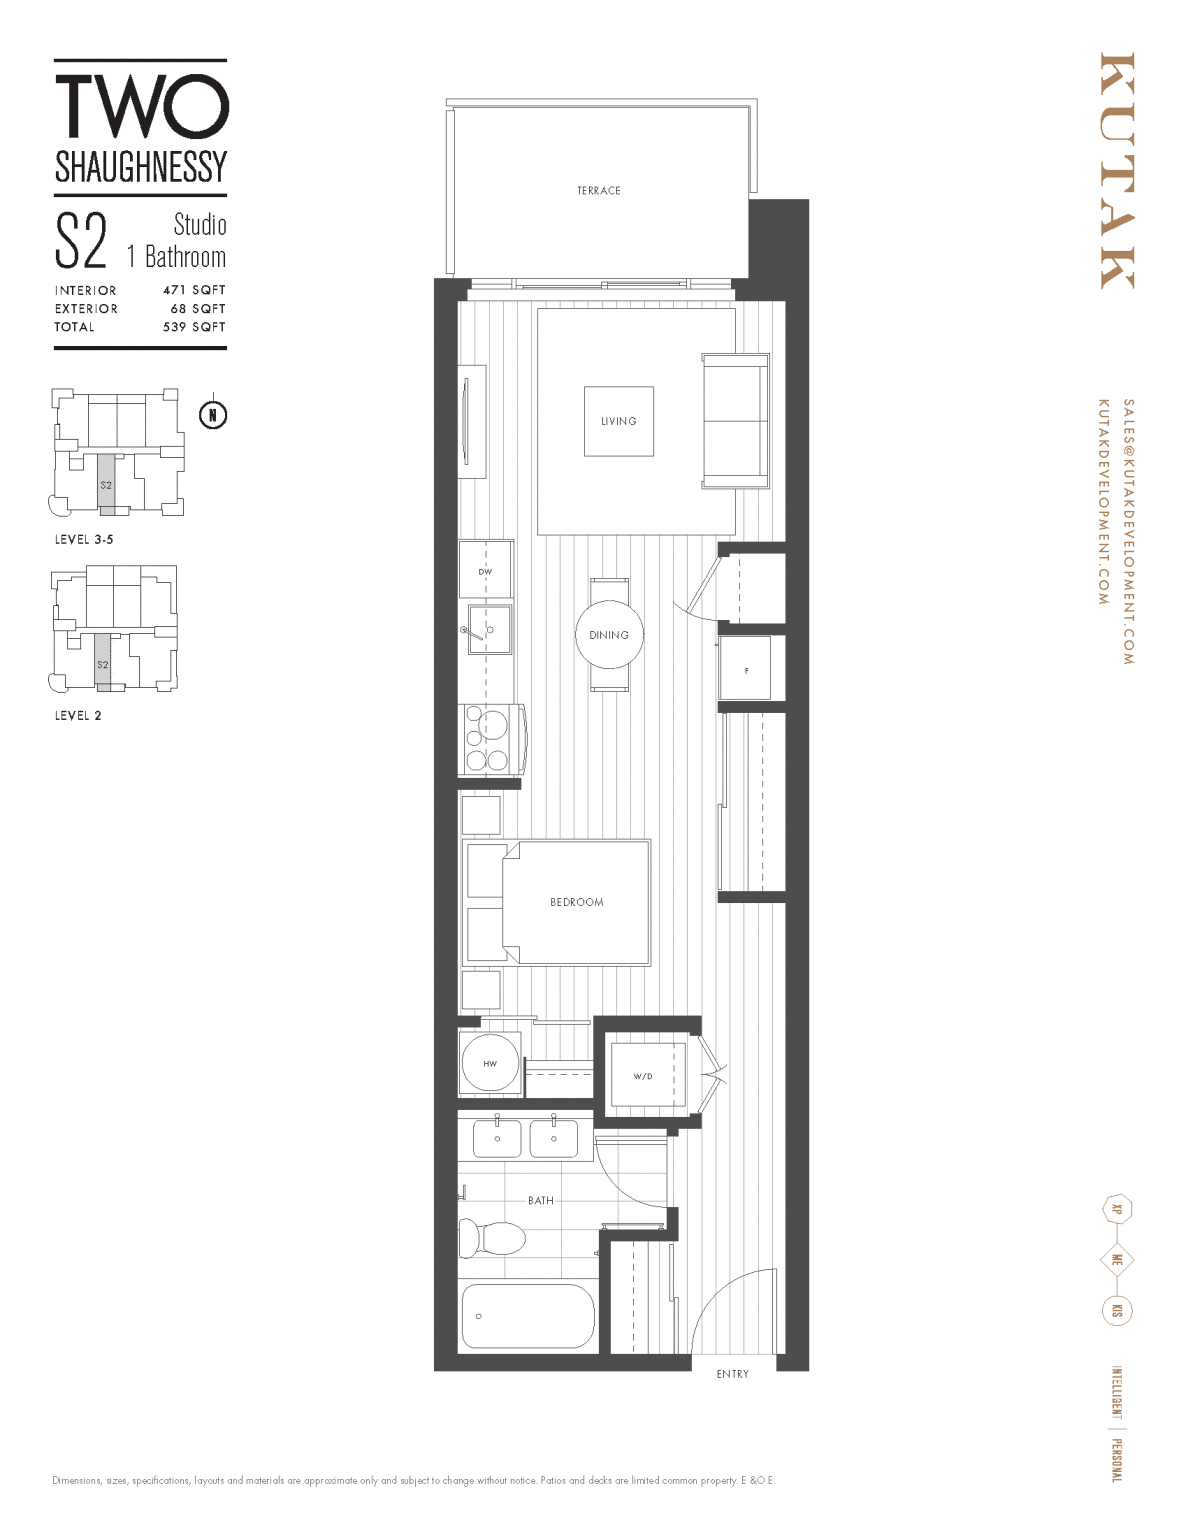 Two Shaughnessy Floor Plan S2